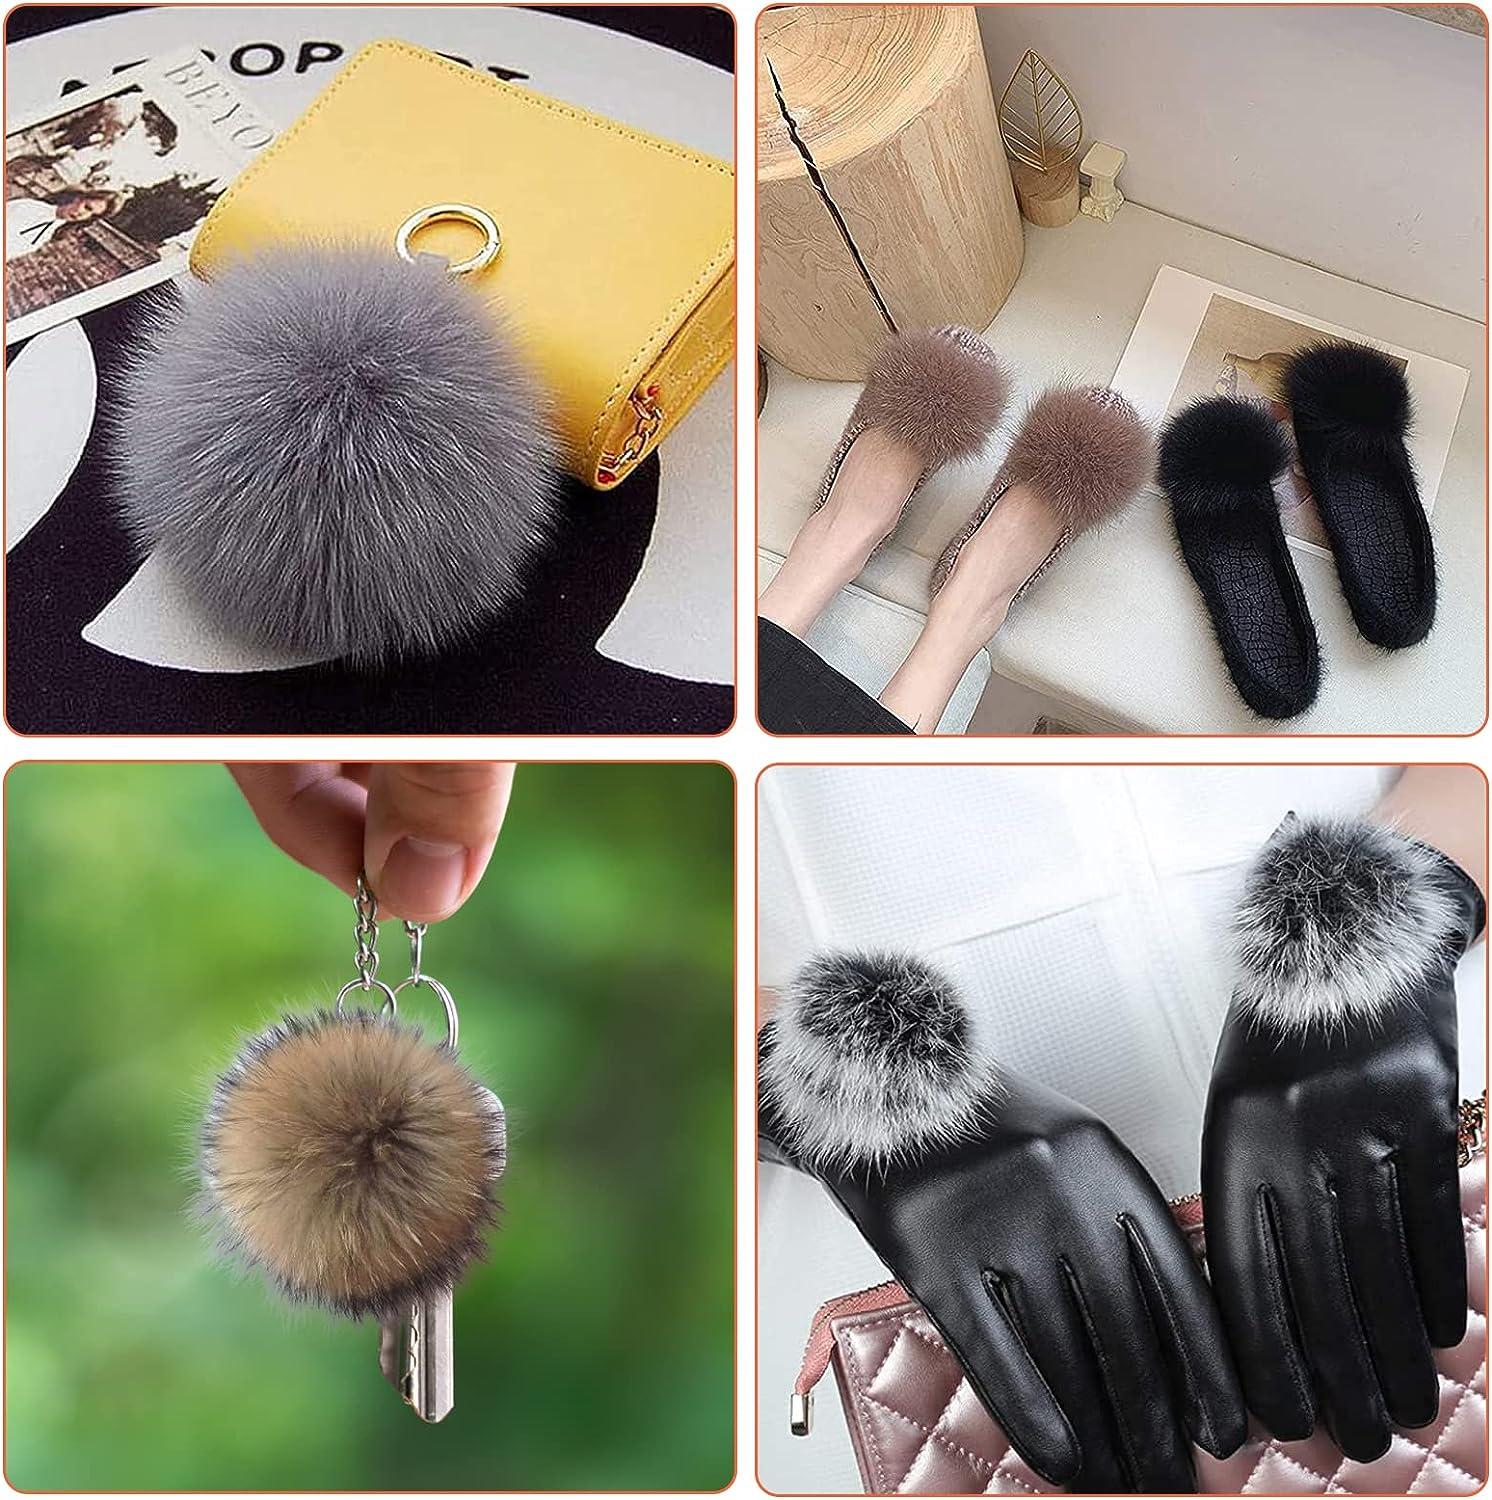  48 Pieces Faux Fur Pom Poms Balls DIY with Elastic Loop  Colorful Fur Key Rings Fluffy 3.1 Inch Rabbit Faux Fur Pompoms for Hats  Scarves Gloves Bags Accessories (Bright Colors)